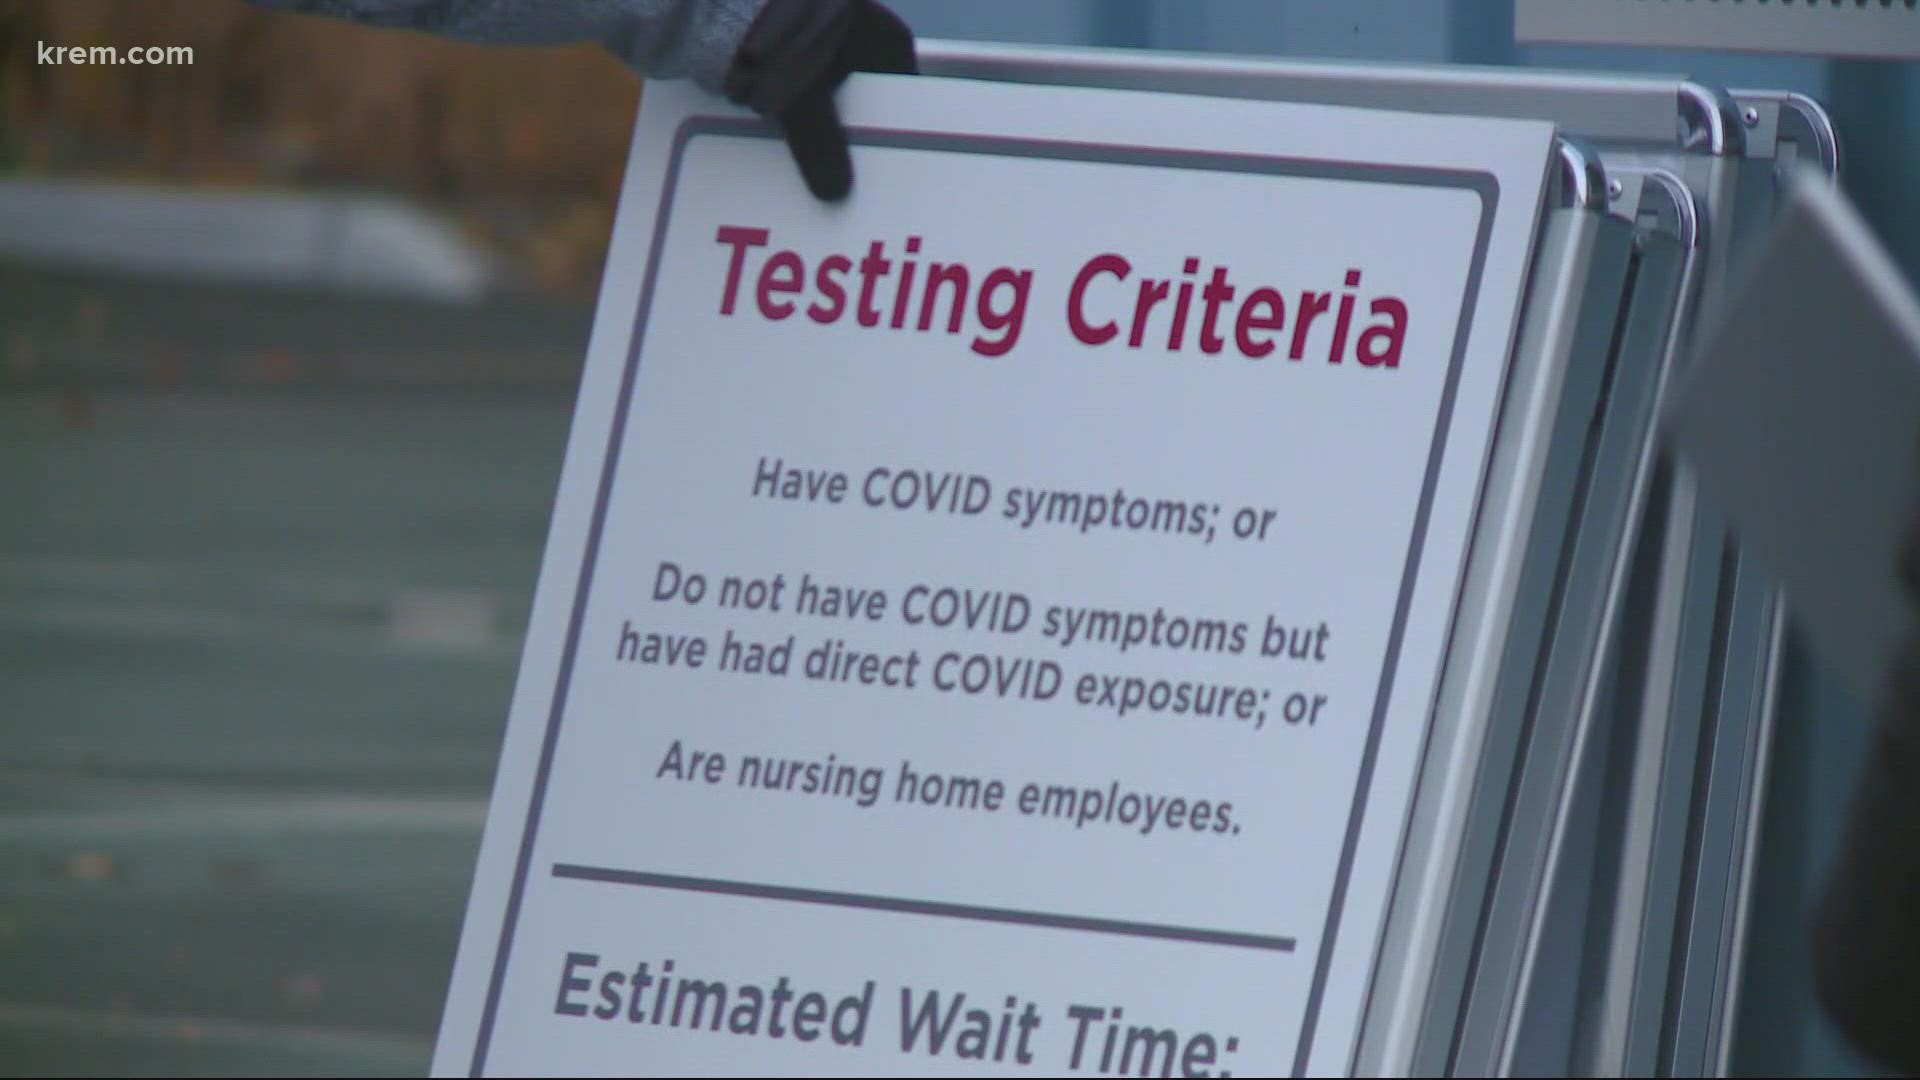 If some one in the Spokane area needs a COVID test because they have symptoms or were exposed, they should call their doctor, according to SRHD.